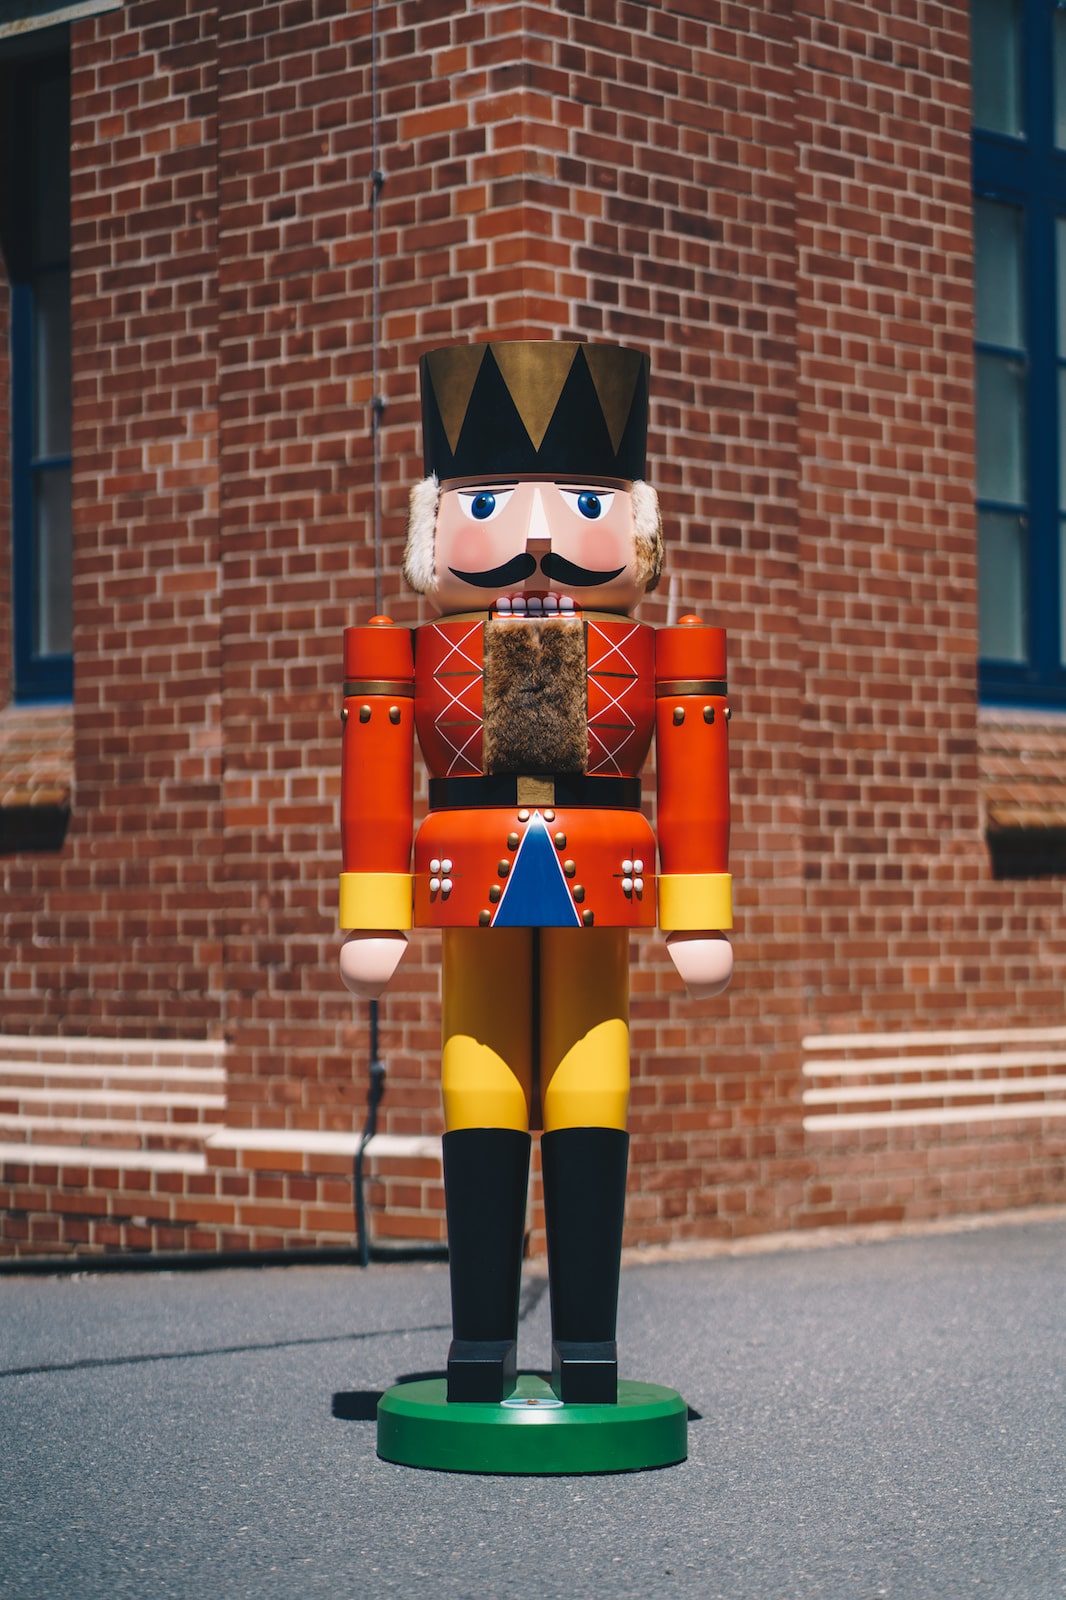 Large Nutcracker Statue from the Ore Mountains